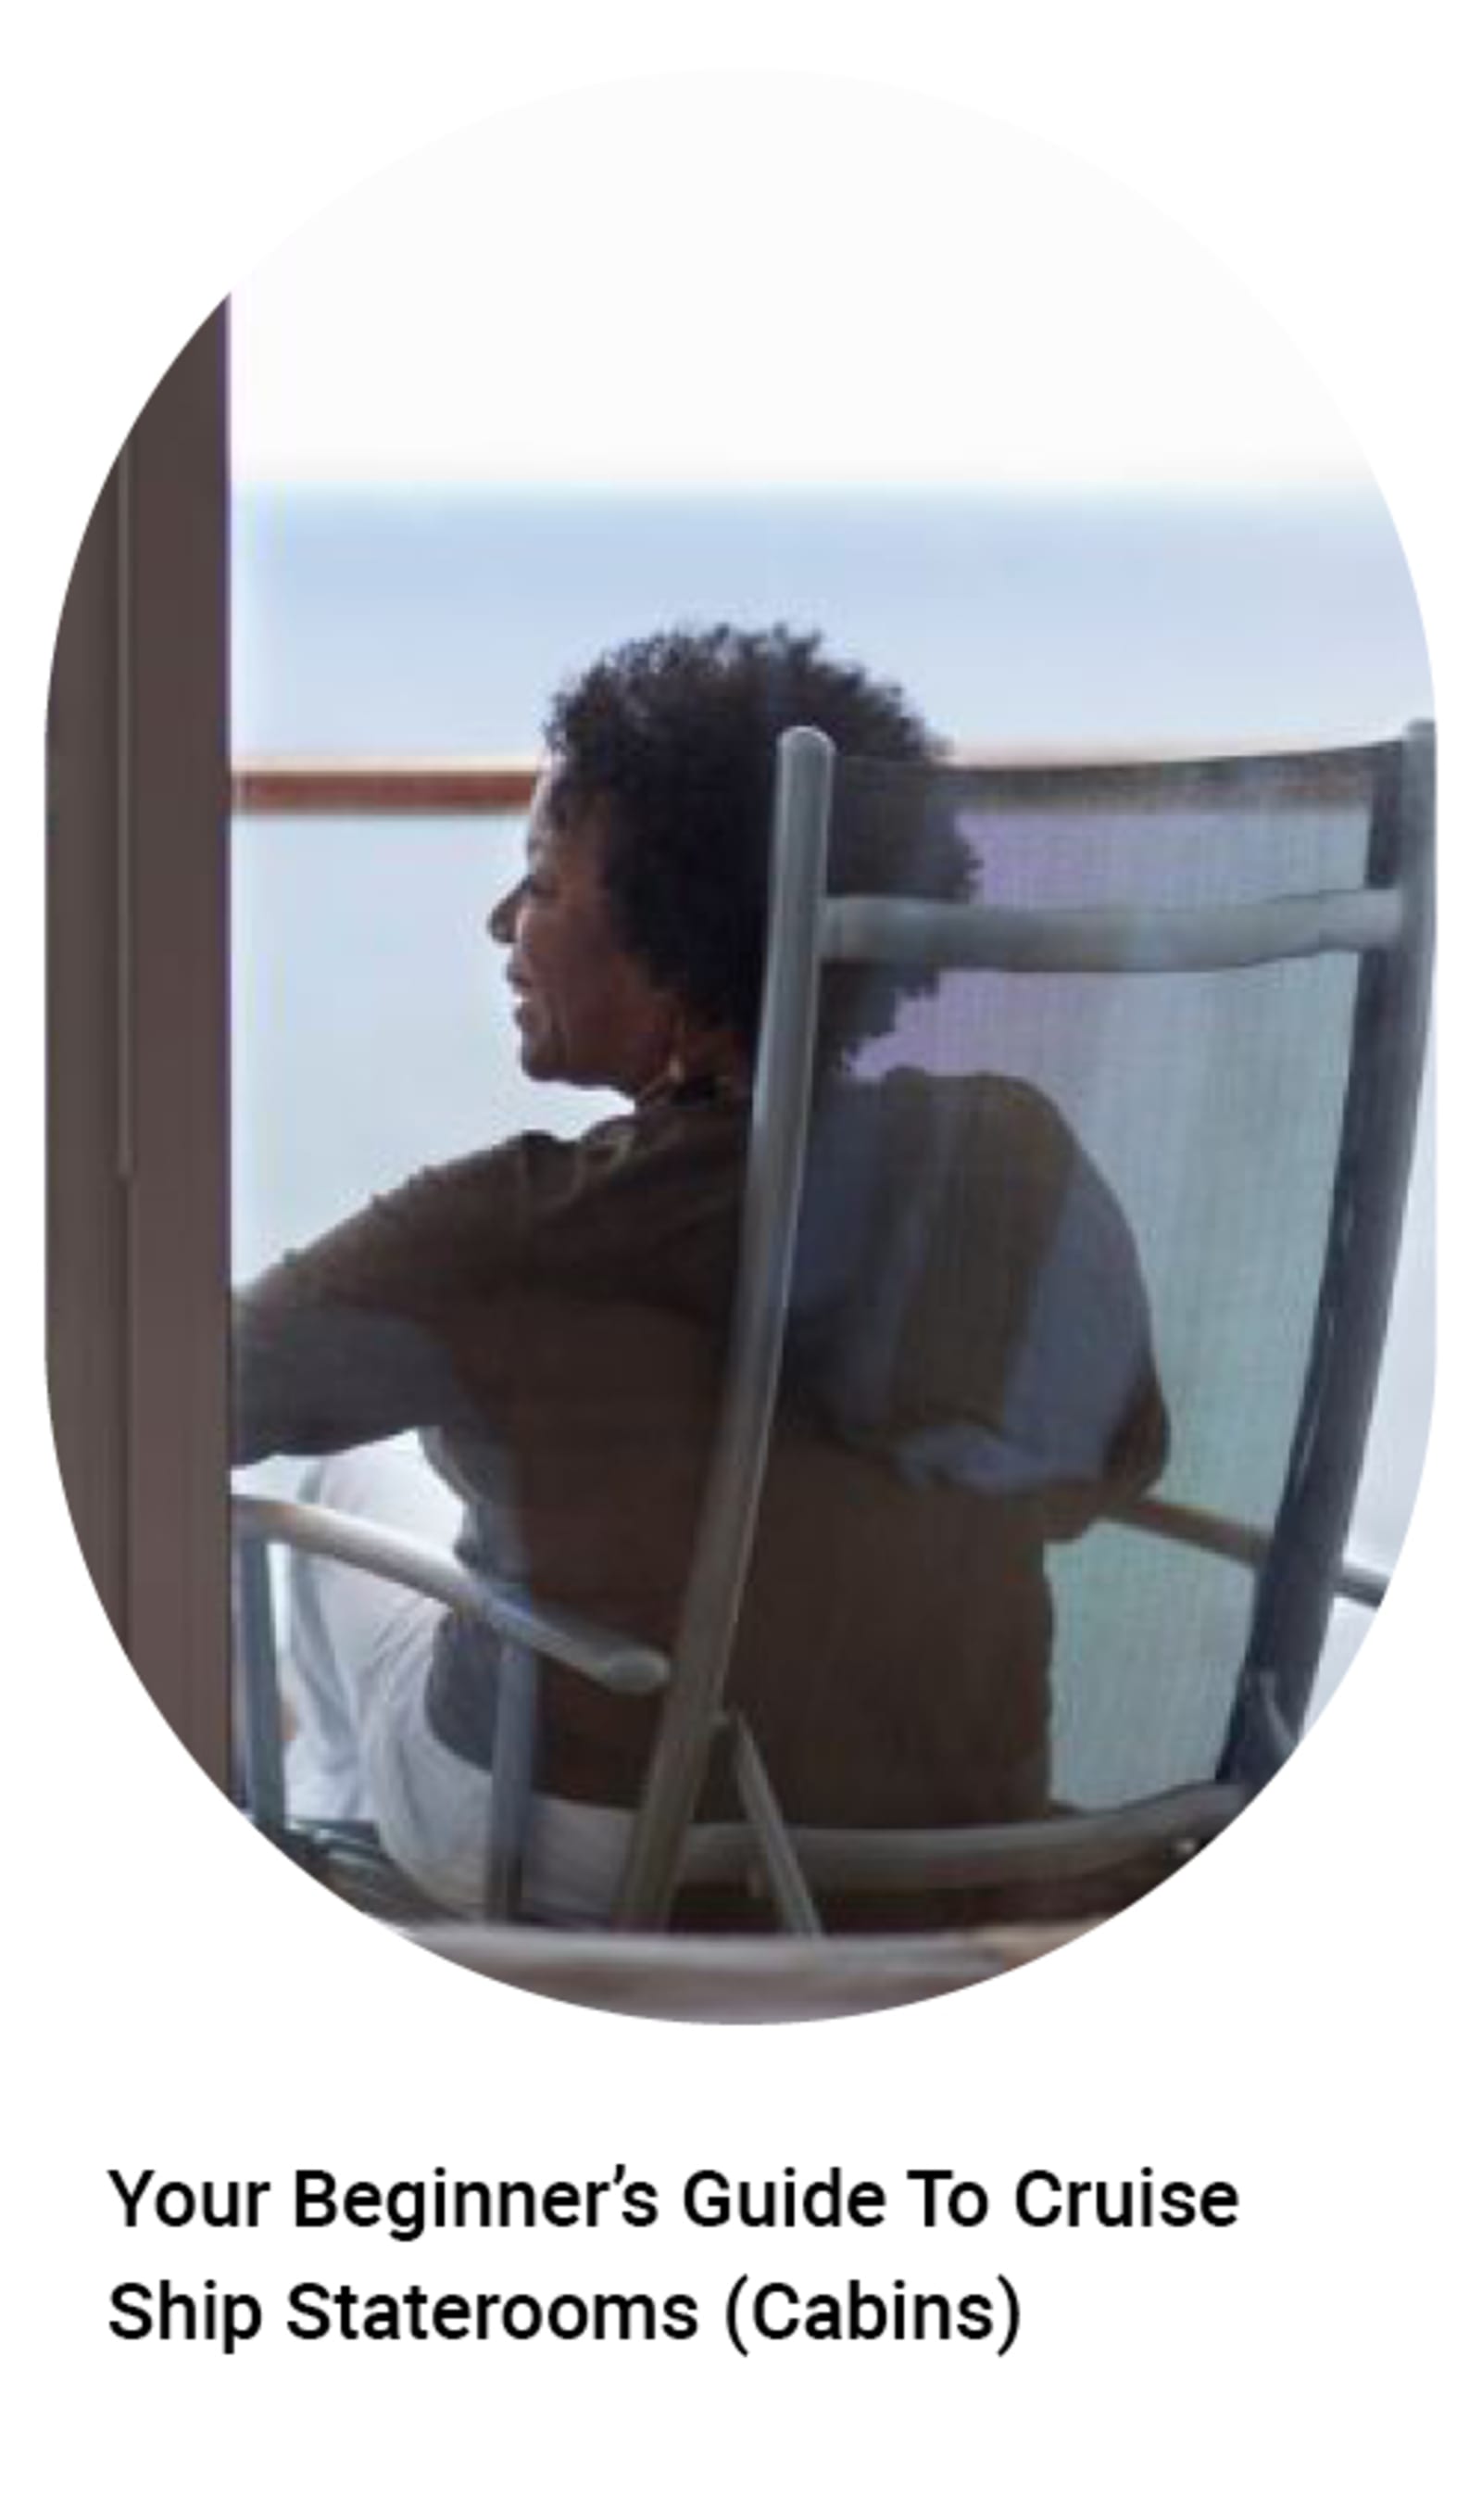 Elderly woman smiling siting in a chair - your beginners guide to cruise ship staterooms (cabins)